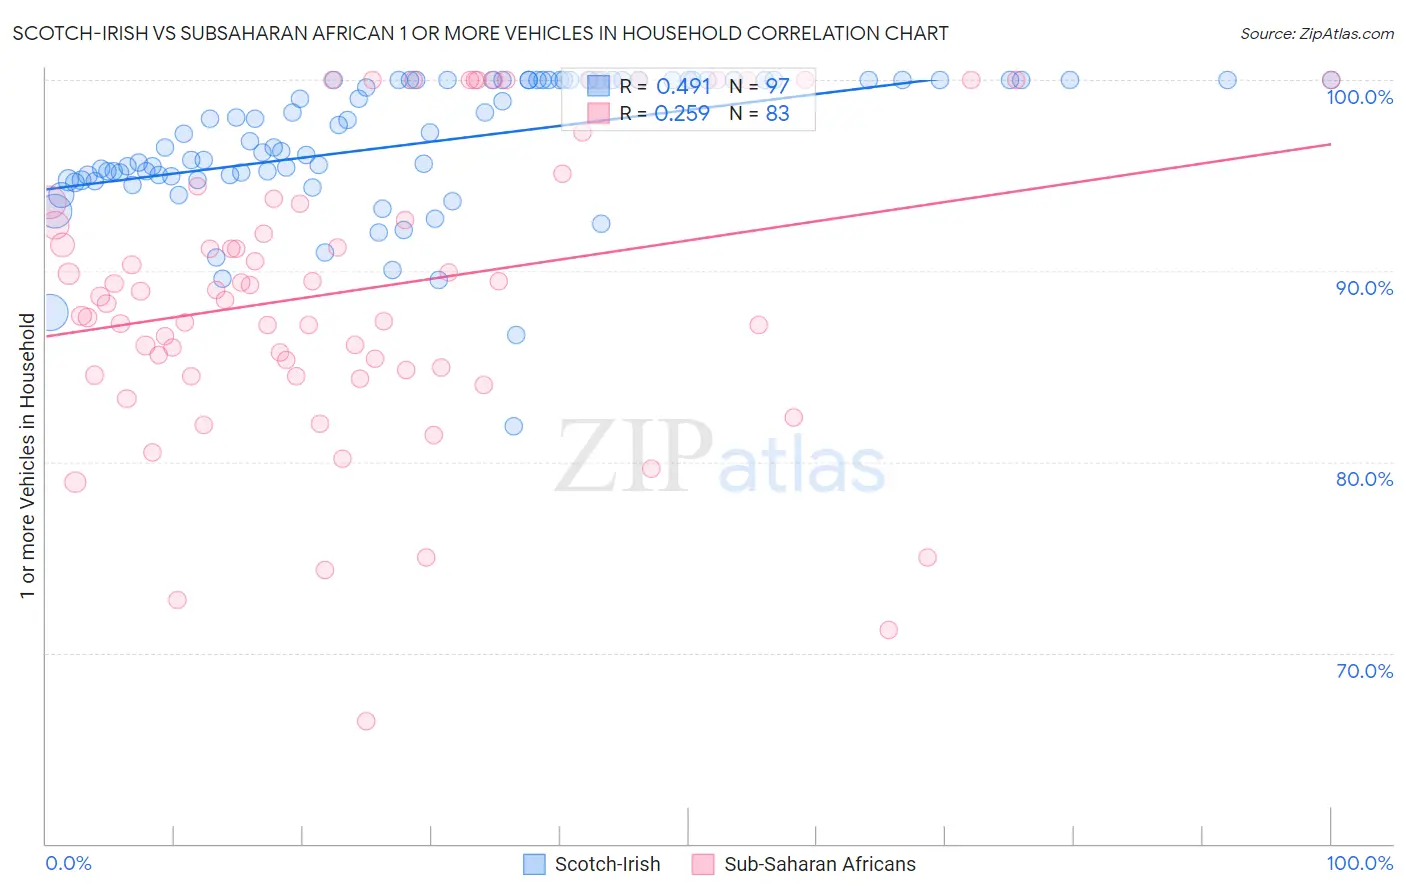 Scotch-Irish vs Subsaharan African 1 or more Vehicles in Household